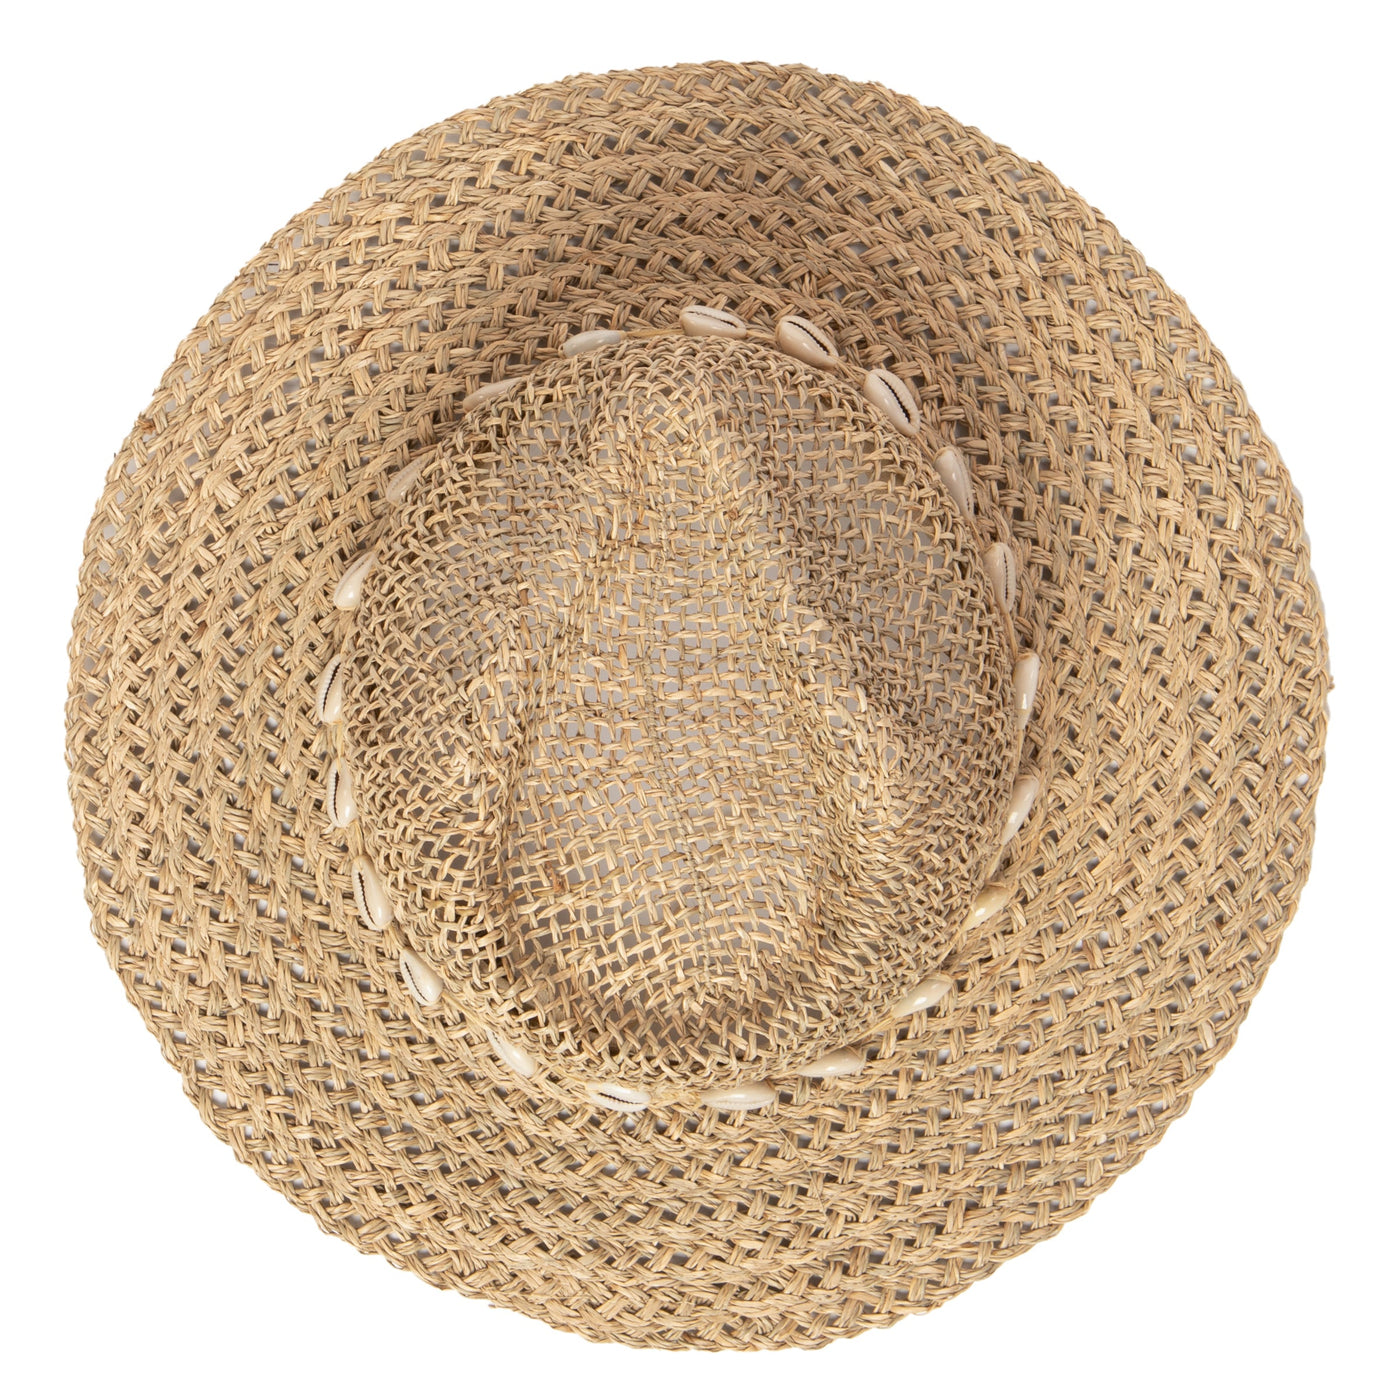 FEDORA - Women's Seagrass Fedora With Gold Plated Shell Band